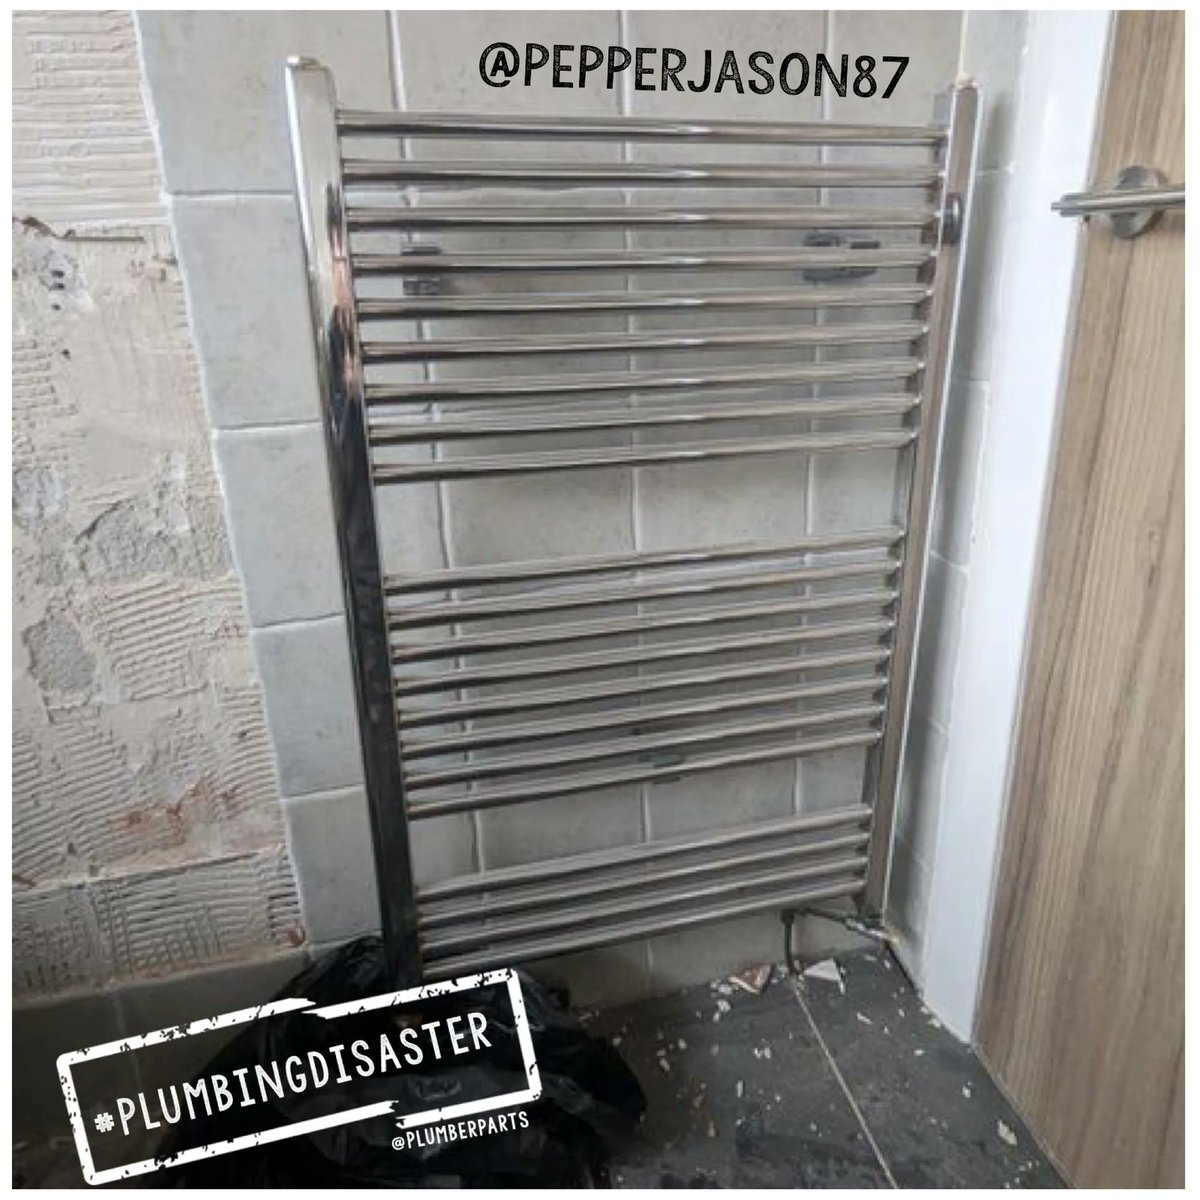 Most people don't know that towel rails have a 'correct way' of being installed. This one is installed incorrectly. Anyway, see why? @pepperjason87 spotted it.
Follow @plumberparts  
#PlumbingDisaster
ps. This was NOT a job carried out by CS Plumbing & Heating btw!